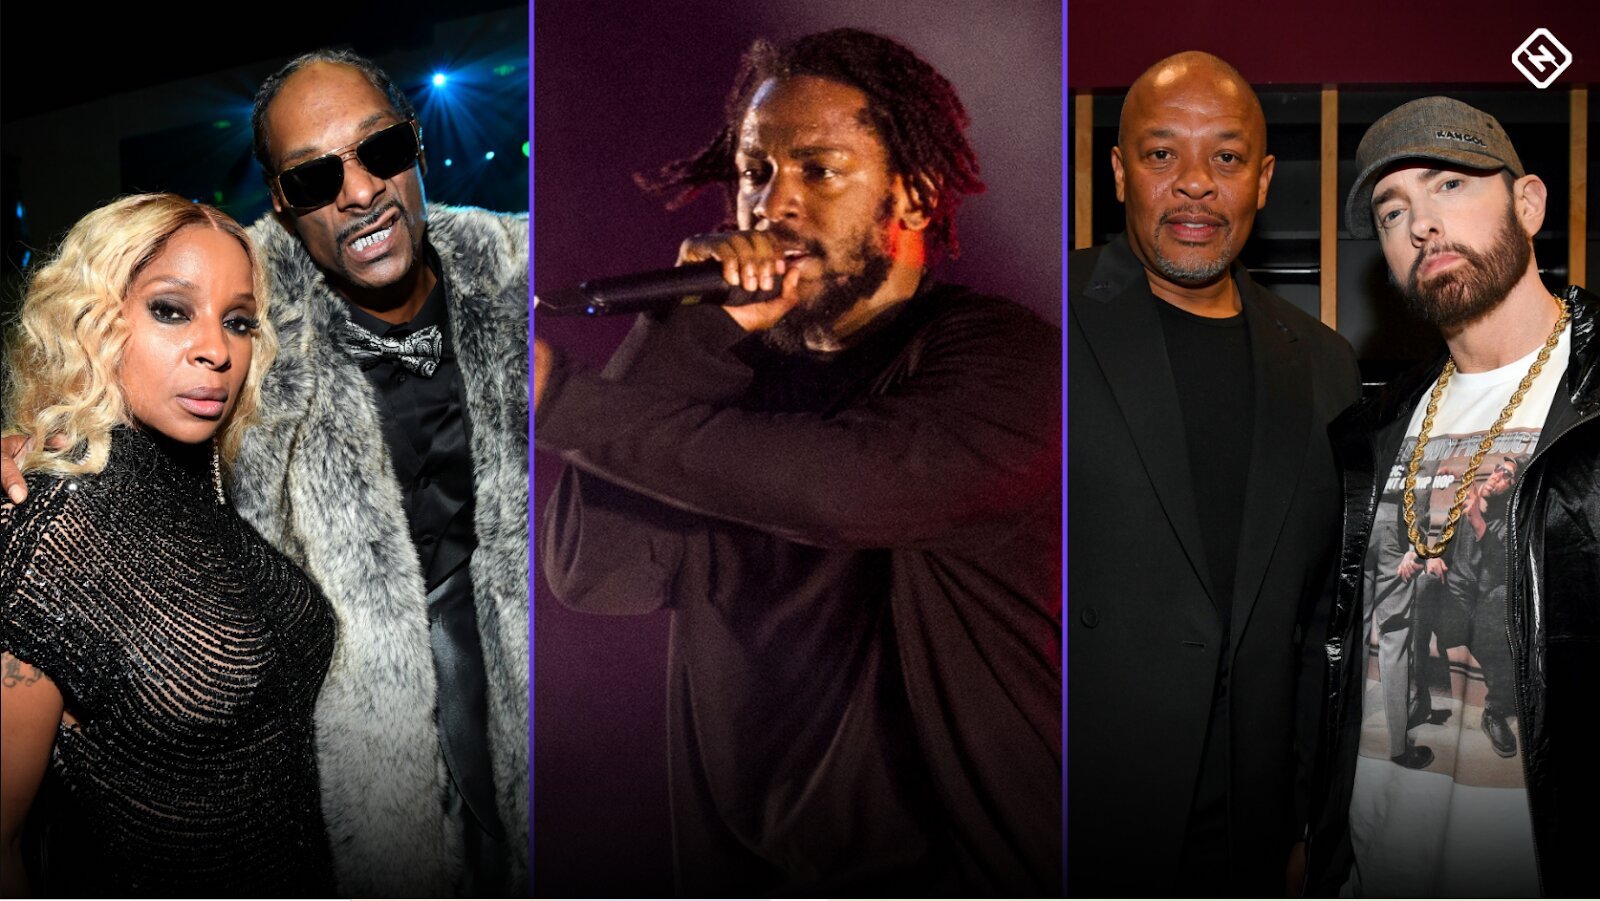 Here's a guide to everything you need to know about Super Bowl halftime show 2022 including Snoop Dogg & Dr. Dre performers live stream for free on reddit.